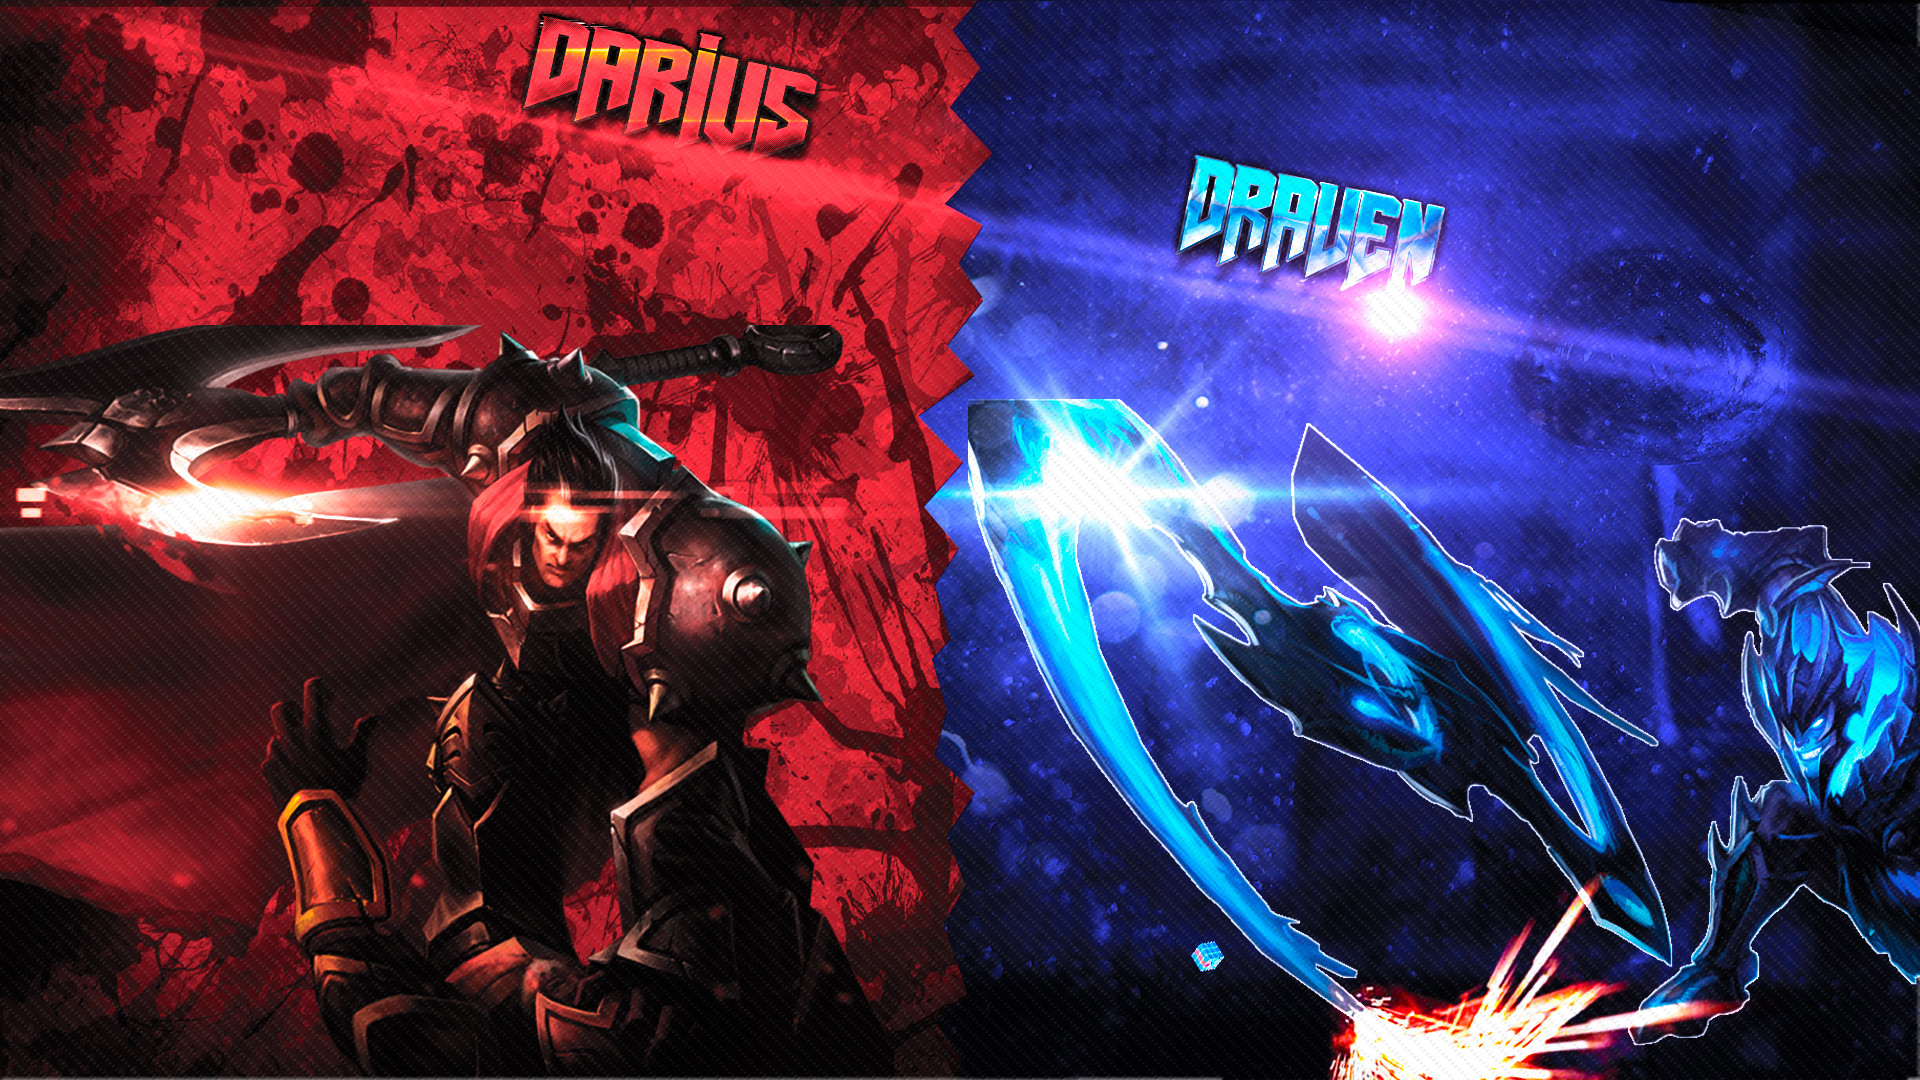 1920x1080 ... Darius and Draven Wallpaper Full HD by pedrovovp